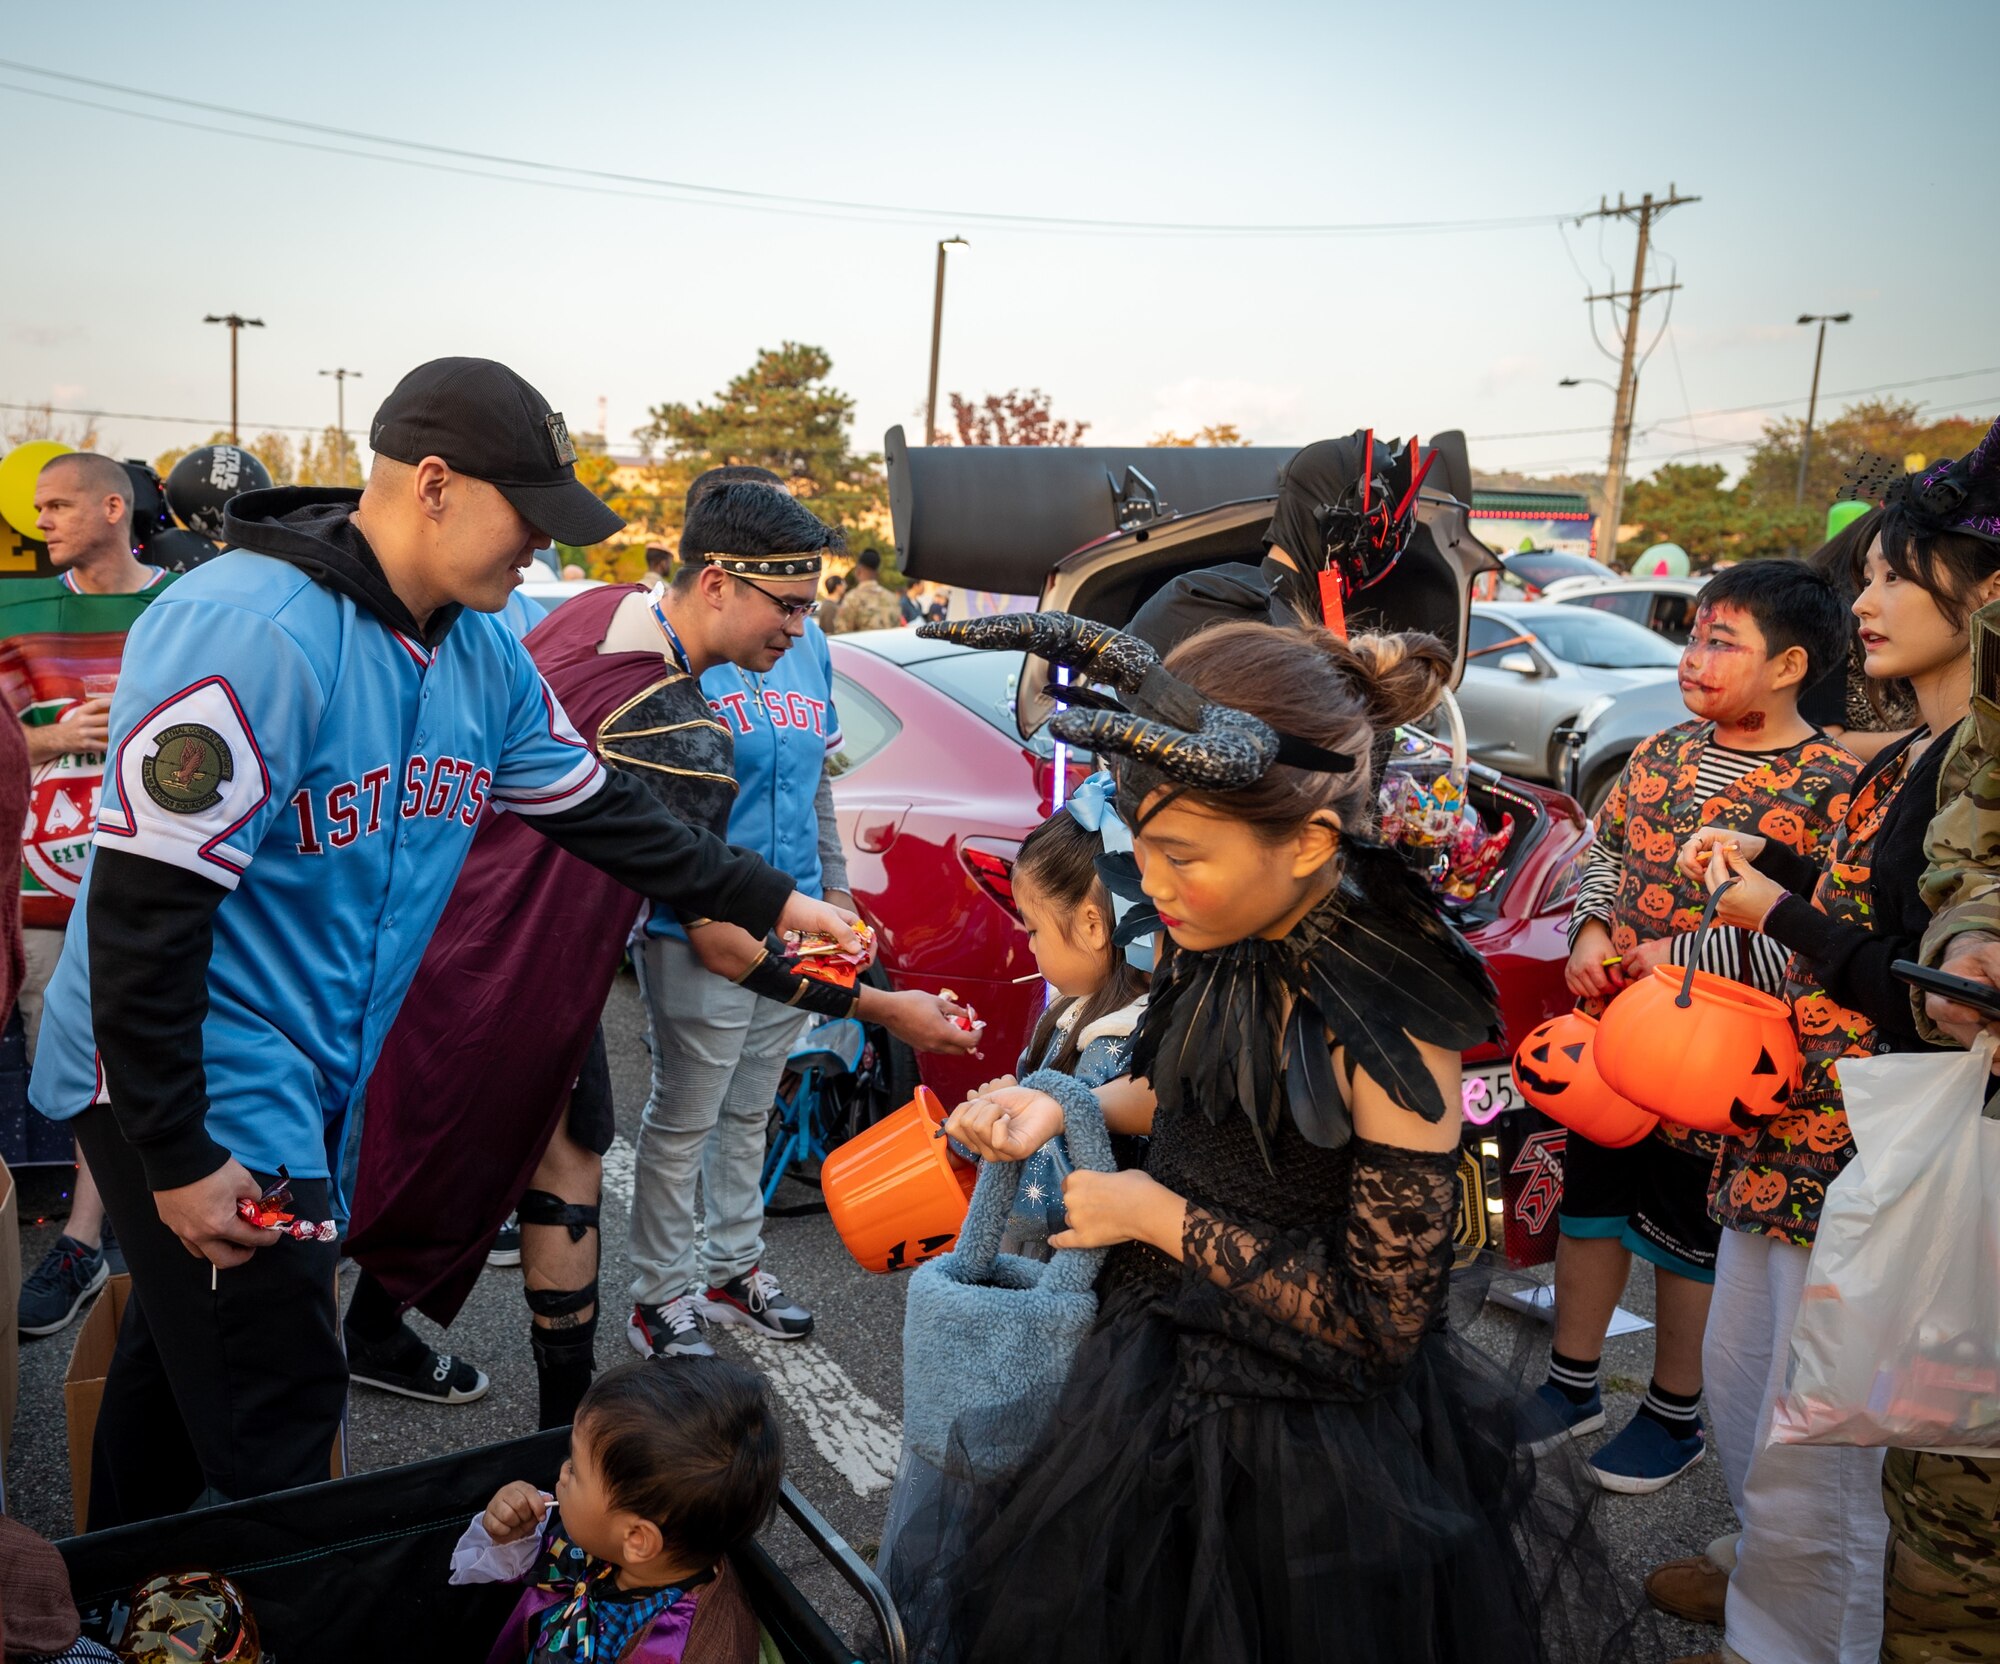 Children collect candy from members of the First Sergeant’s Association during the Trunk-or-Treat event at Osan Air Base, Republic of Korea, Oct. 27, 2023. The event created a fun and safe environment for military members and their families to enjoy Halloween activities such as food, games and costume contests to foster community morale. (U.S. Air Force photo by Staff Sgt. Kelsea Caballero)